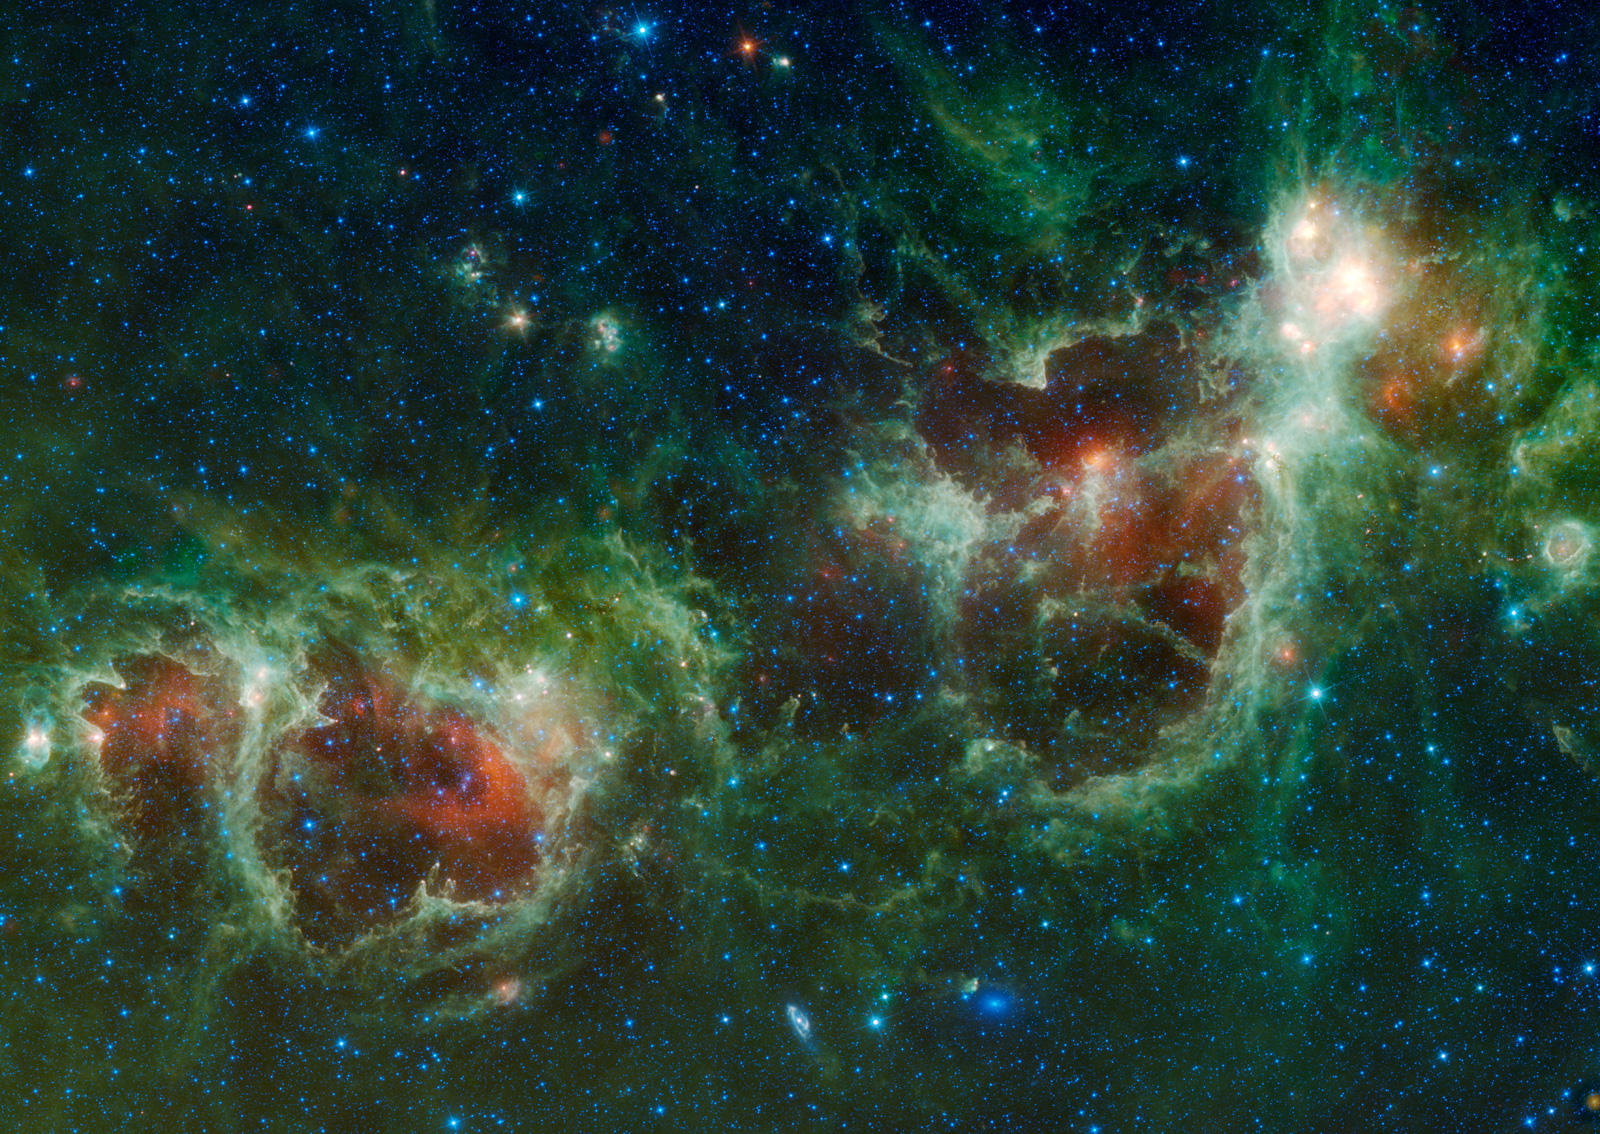 Two distinct multicolored clouds are visible.  The one on the right, which resembles a human heart, is called the Heart Nebula and the one on the left is called the Soul Nebula.